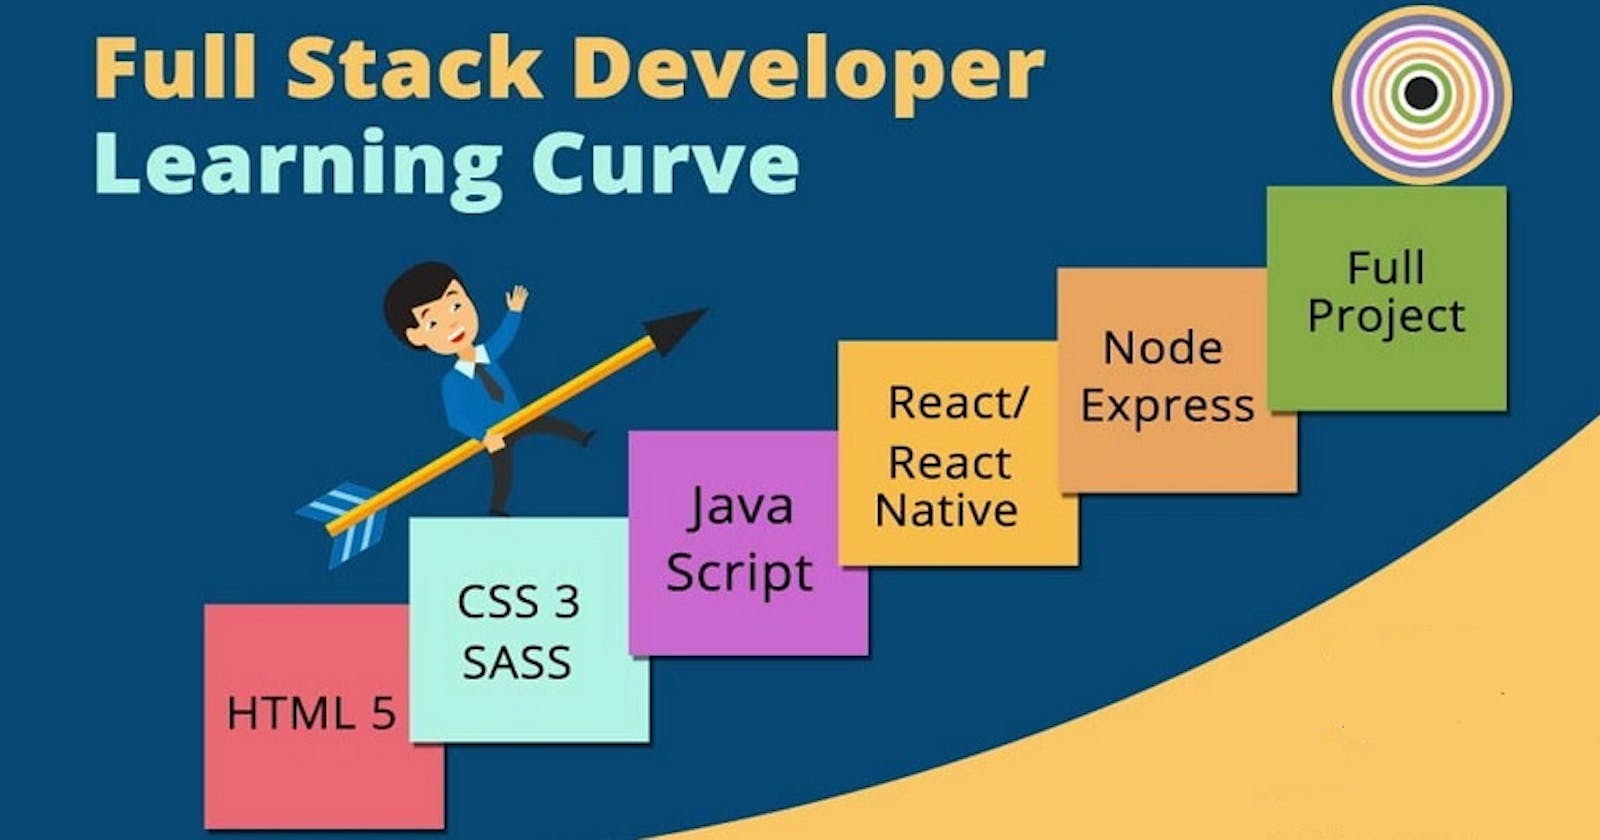 Become a Full Stack Developer with Top Training Opportunities